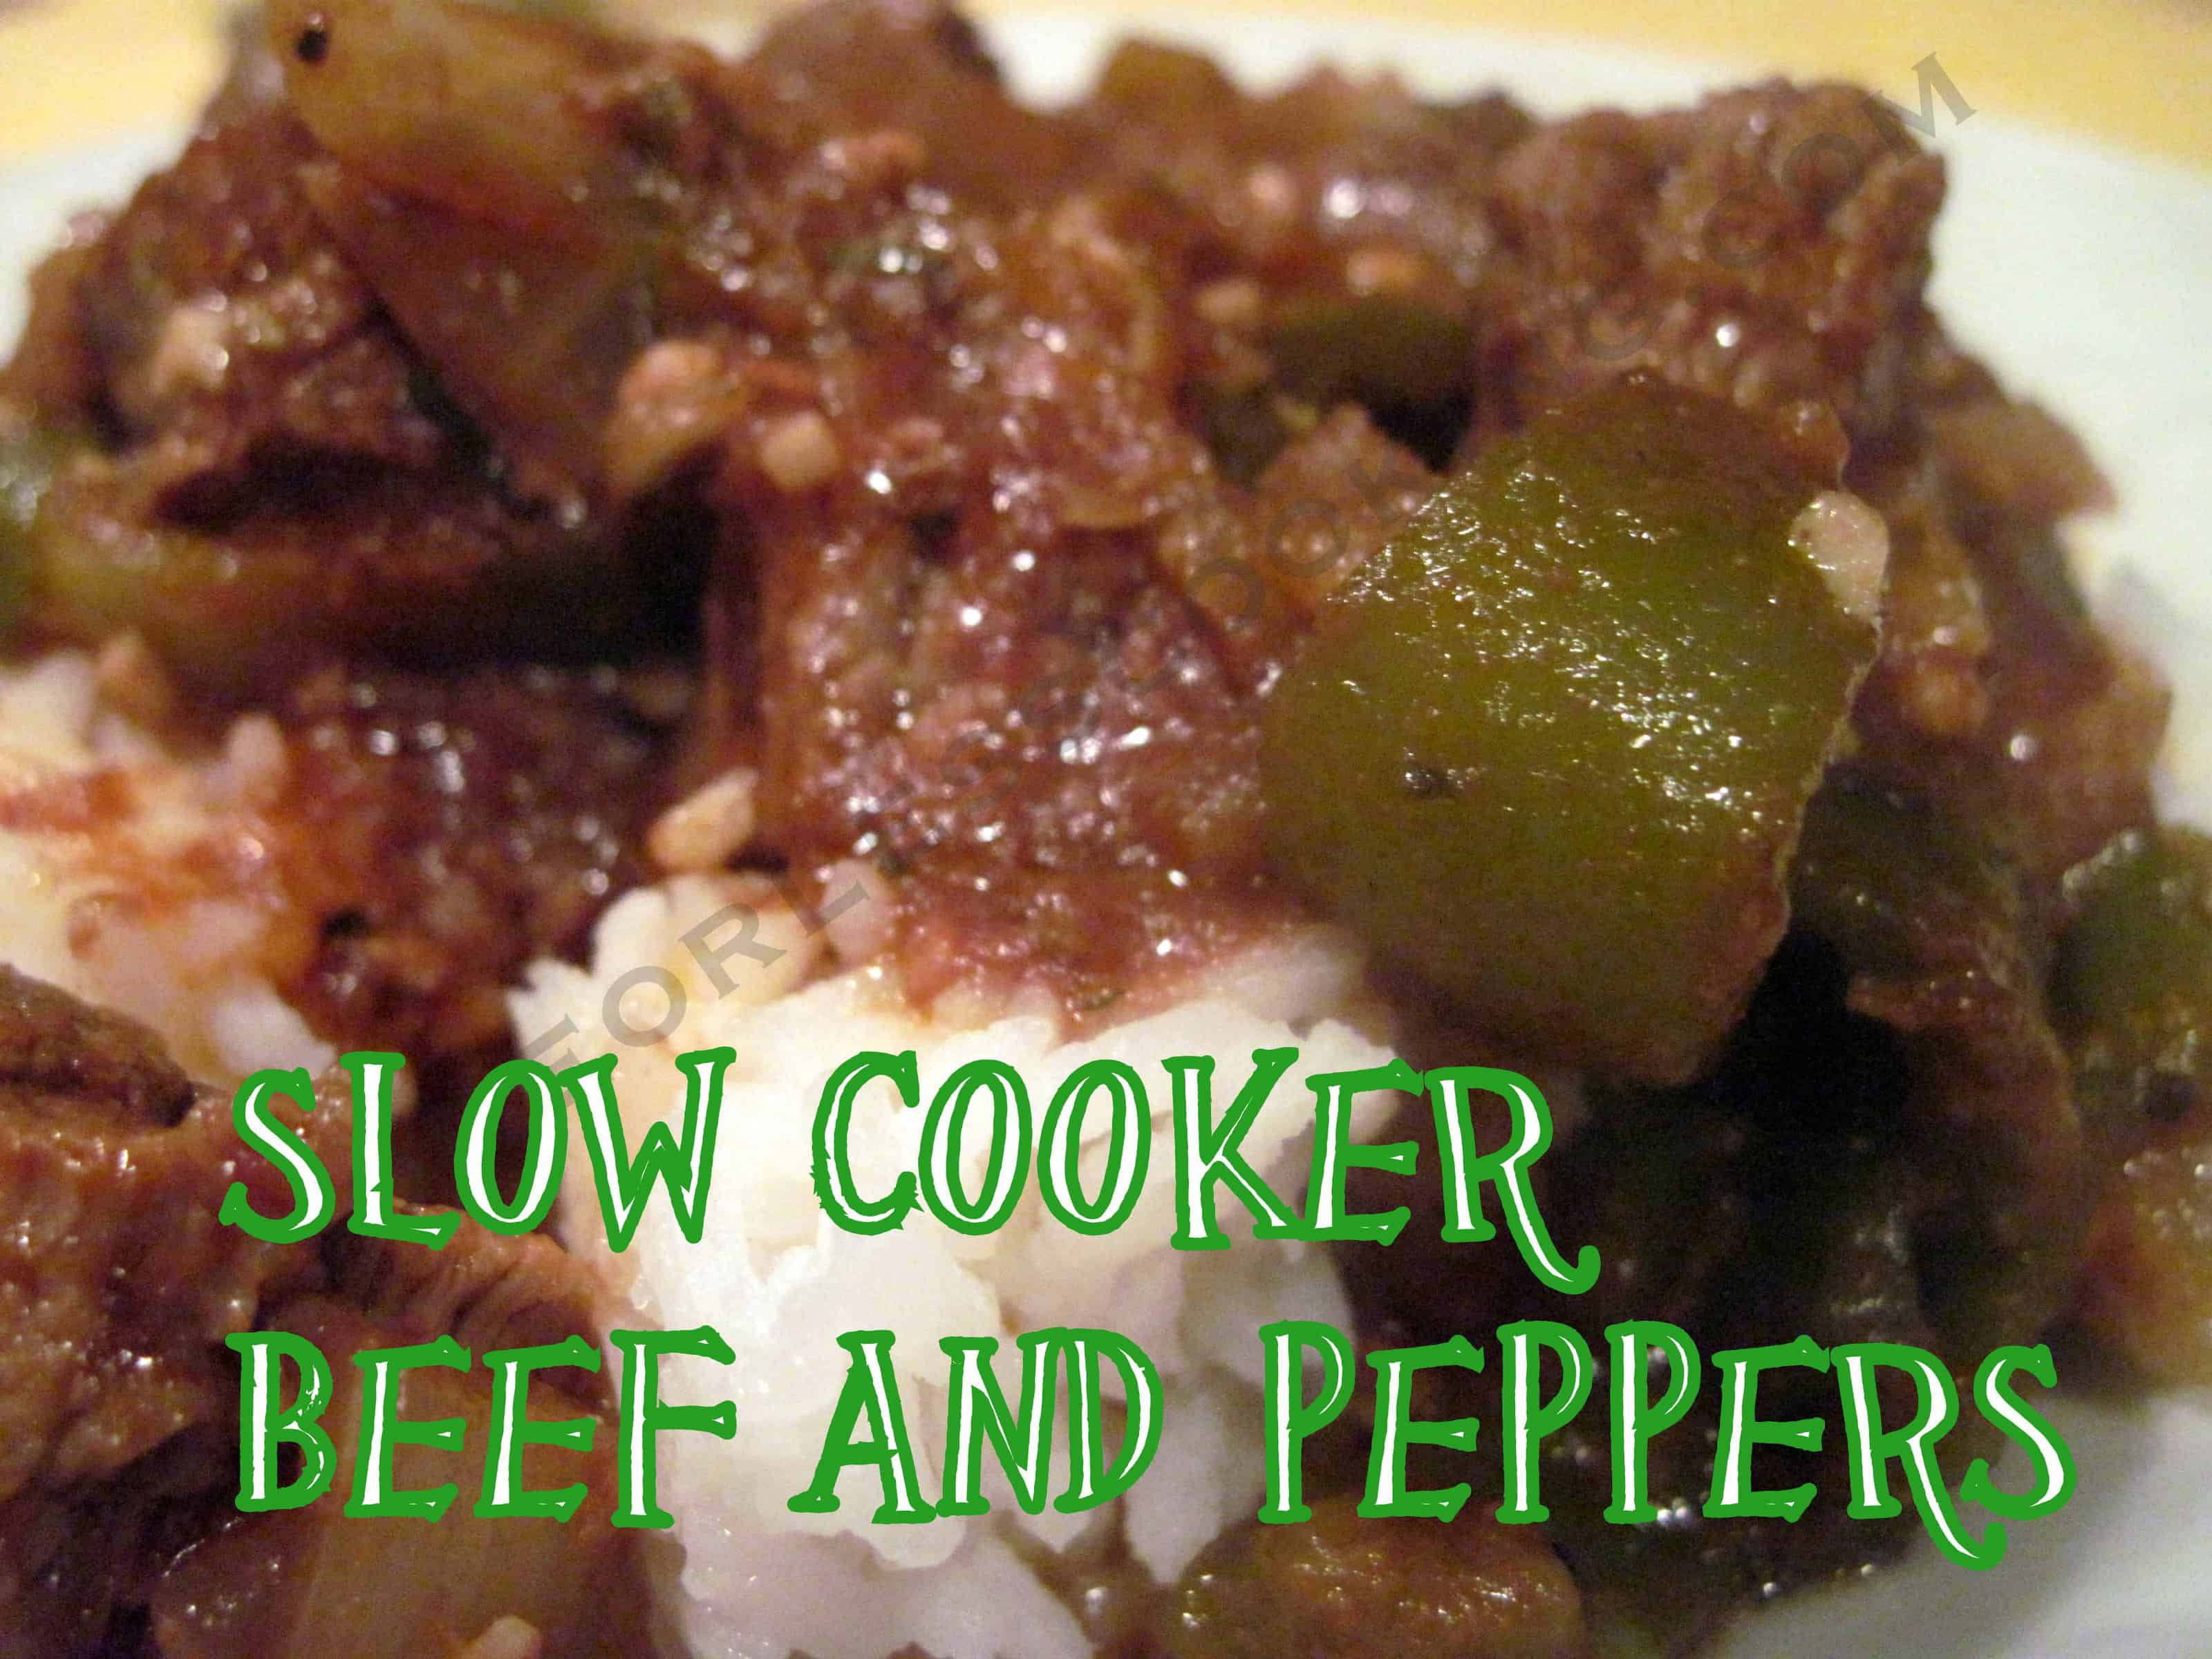 SLOW COOKER BEEF AND PEPPERS